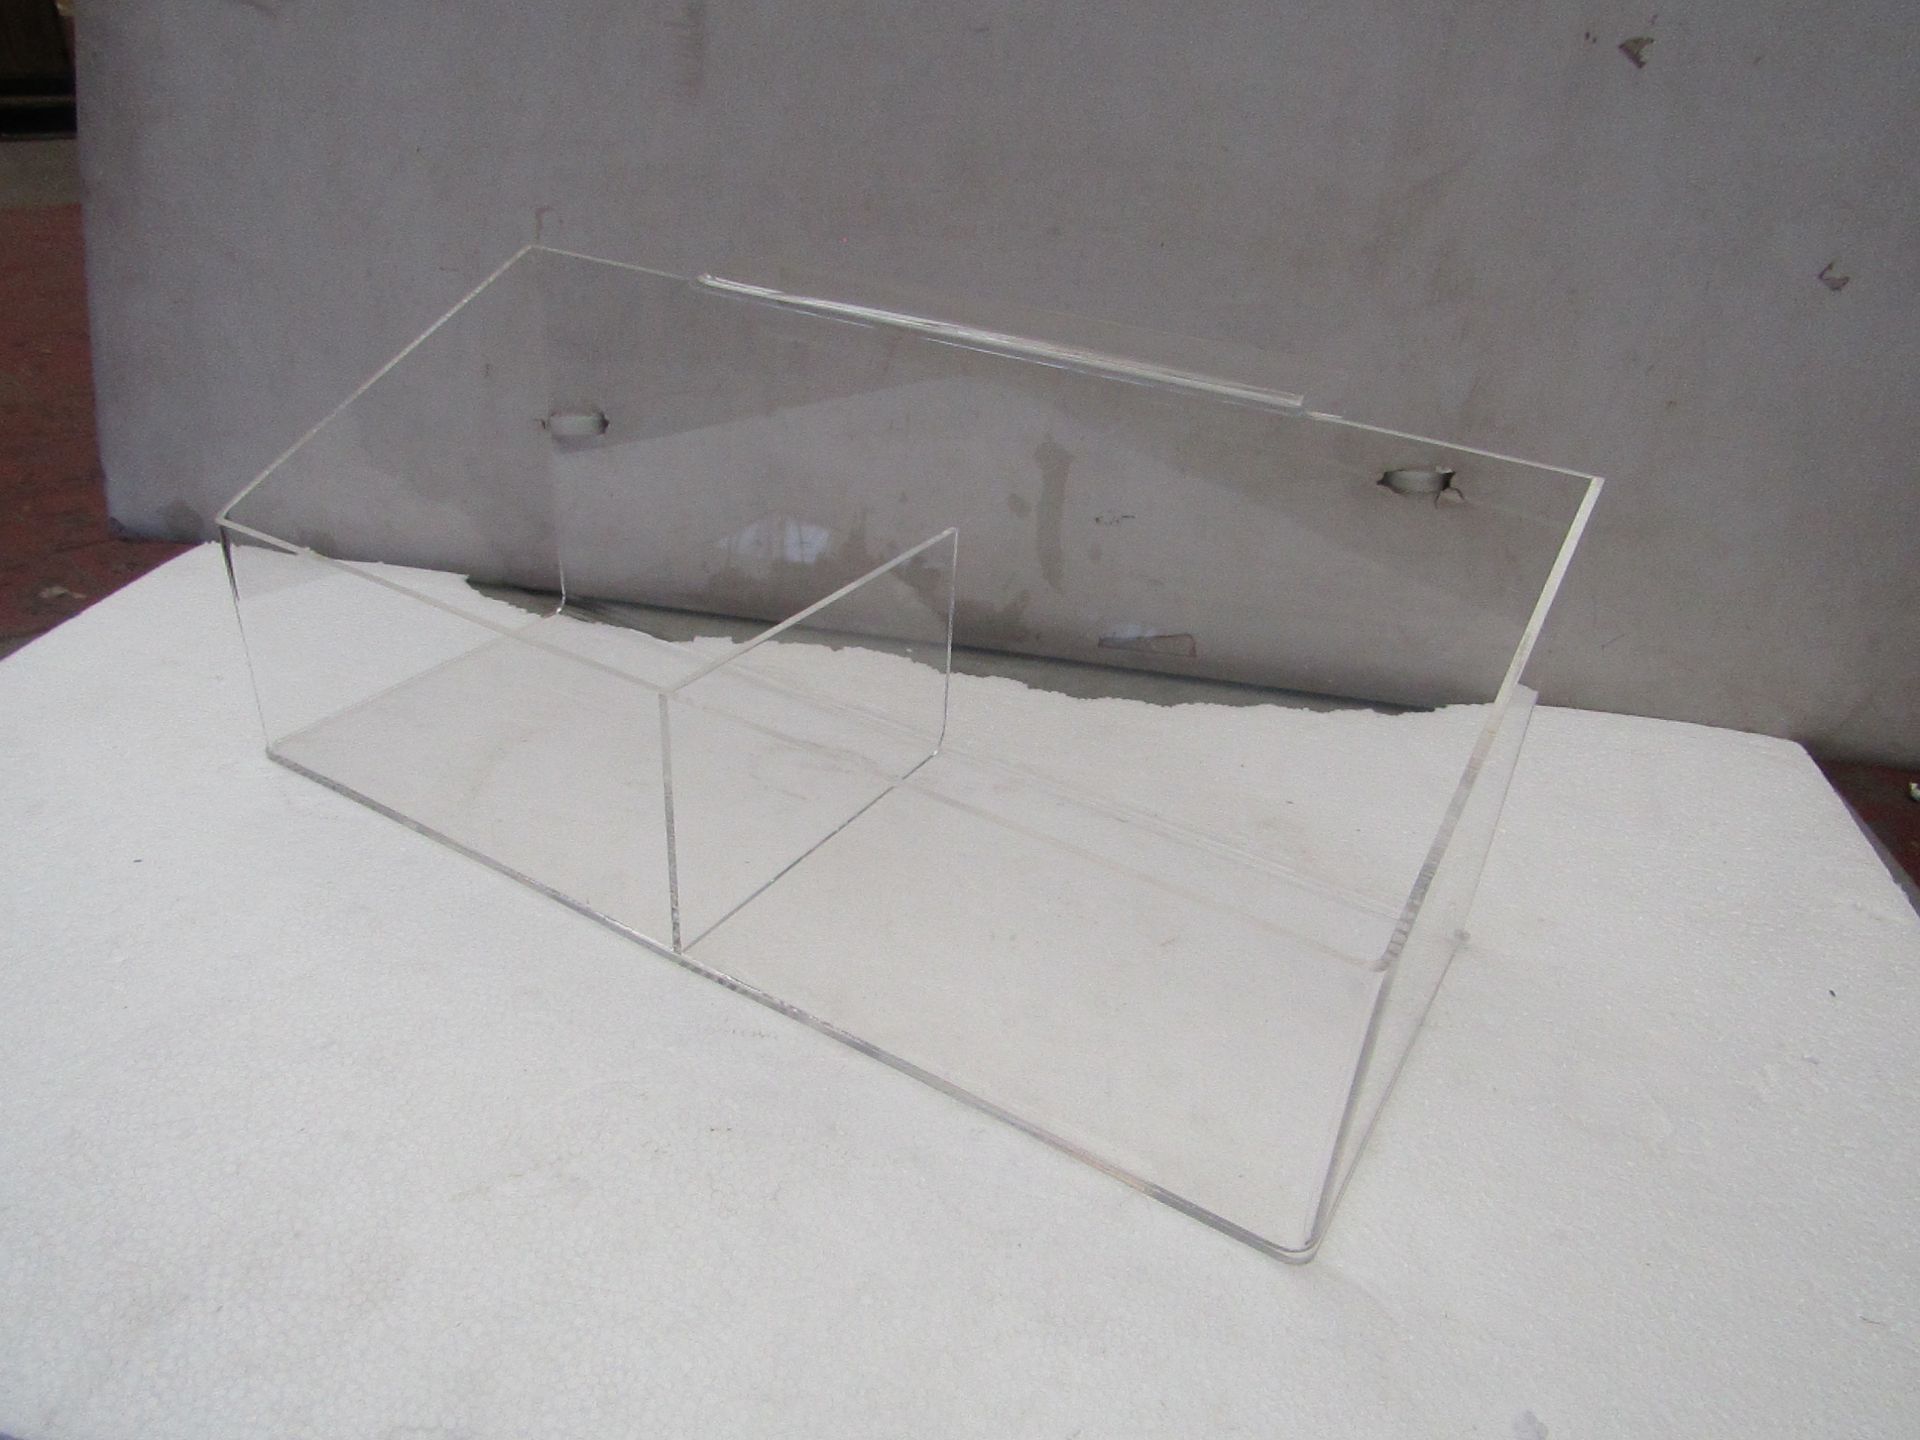 2x Spanx - Transparent Double Bin For Ladder ( 38cm Long X 15cm Tall X 15 Wide ) - Good Condition.